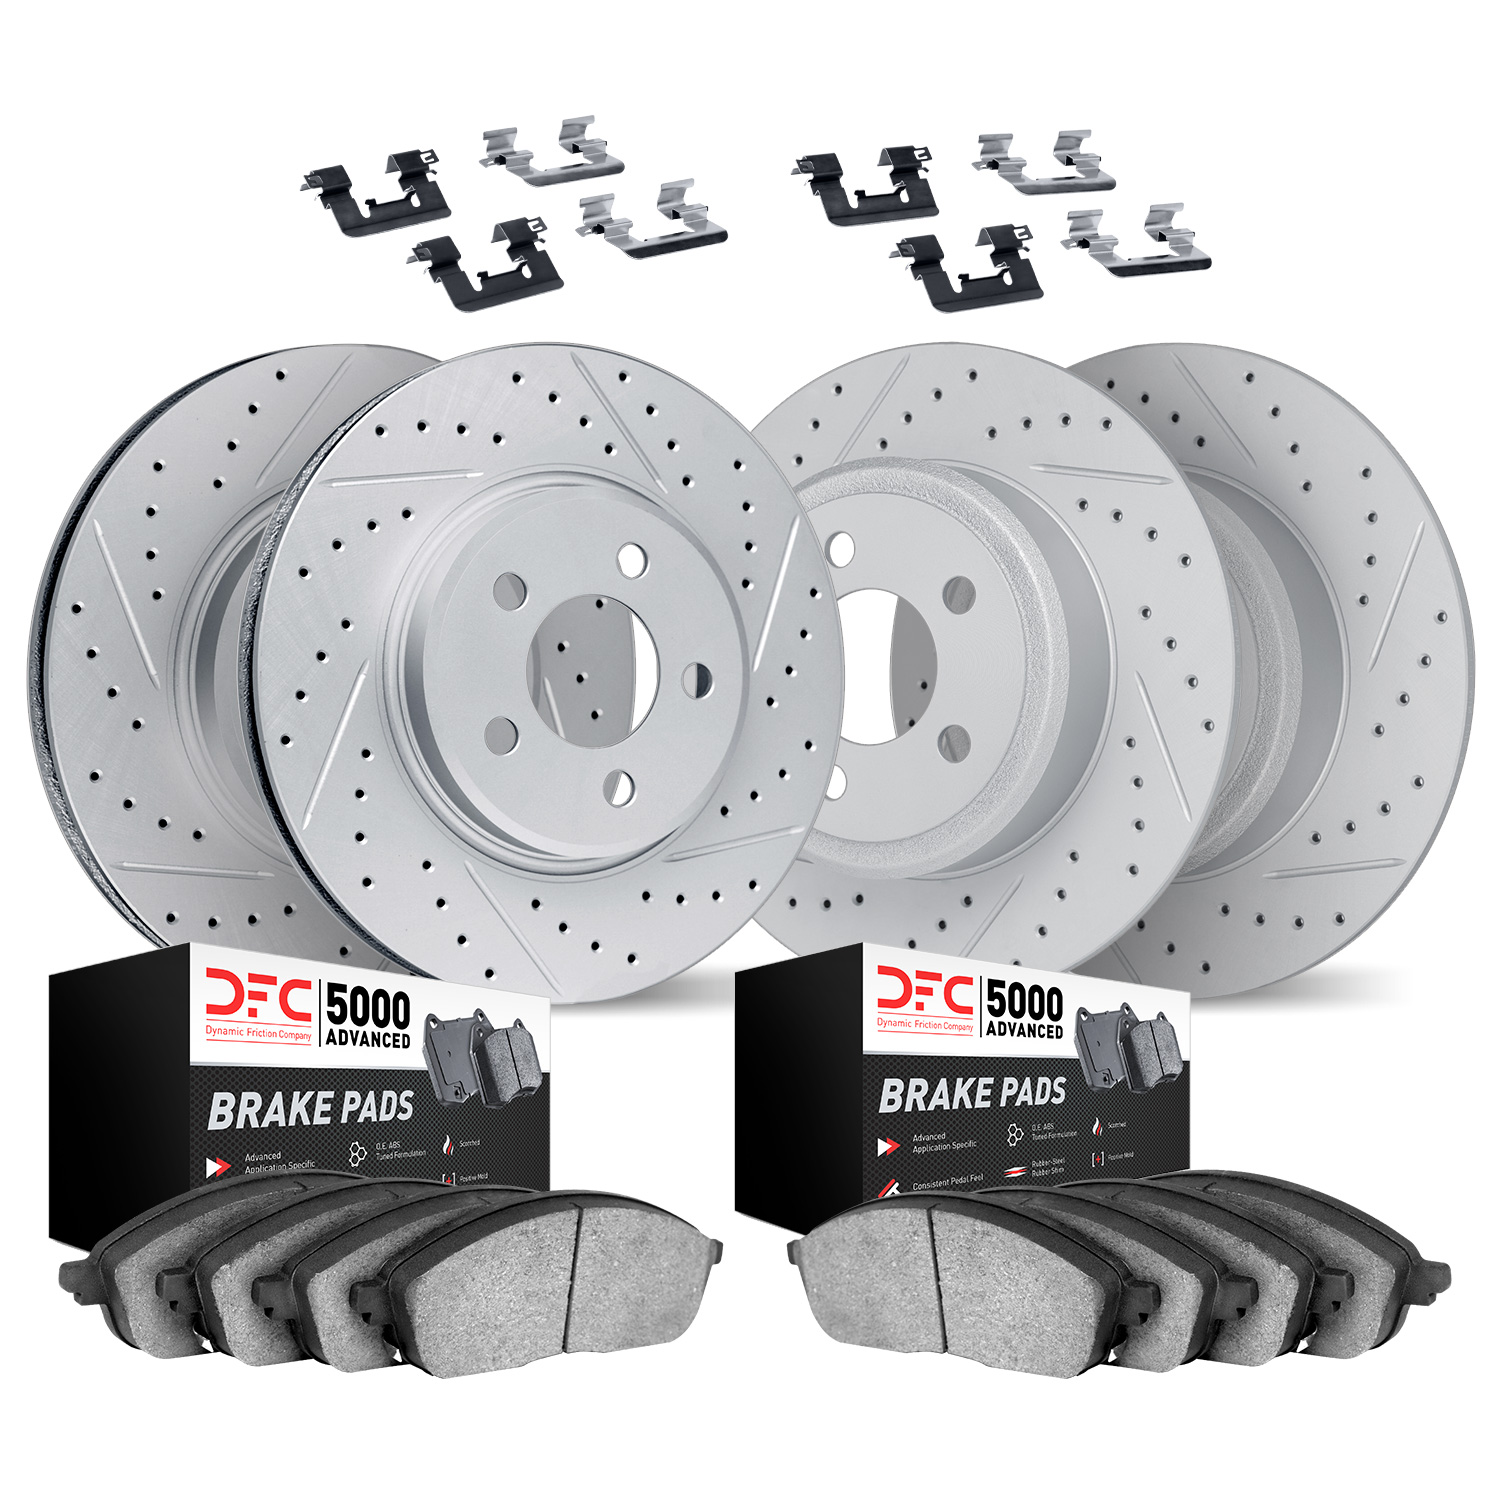 2514-45014 Geoperformance Drilled/Slotted Rotors w/5000 Advanced Brake Pads Kit & Hardware, 2006-2011 GM, Position: Front and Re